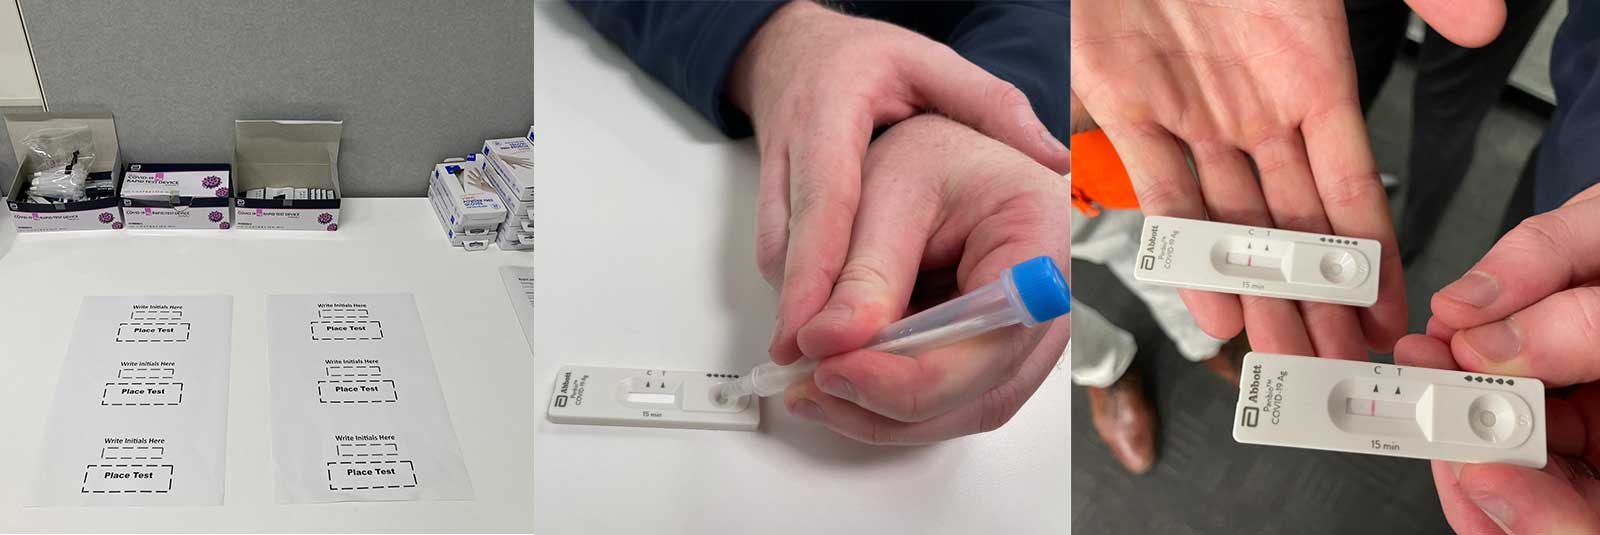 3 images of what the rapid antigen test process looks like. Rapid antigen tests in their boxes, somebody taking a sample, and people showing their rapid antigen test results.